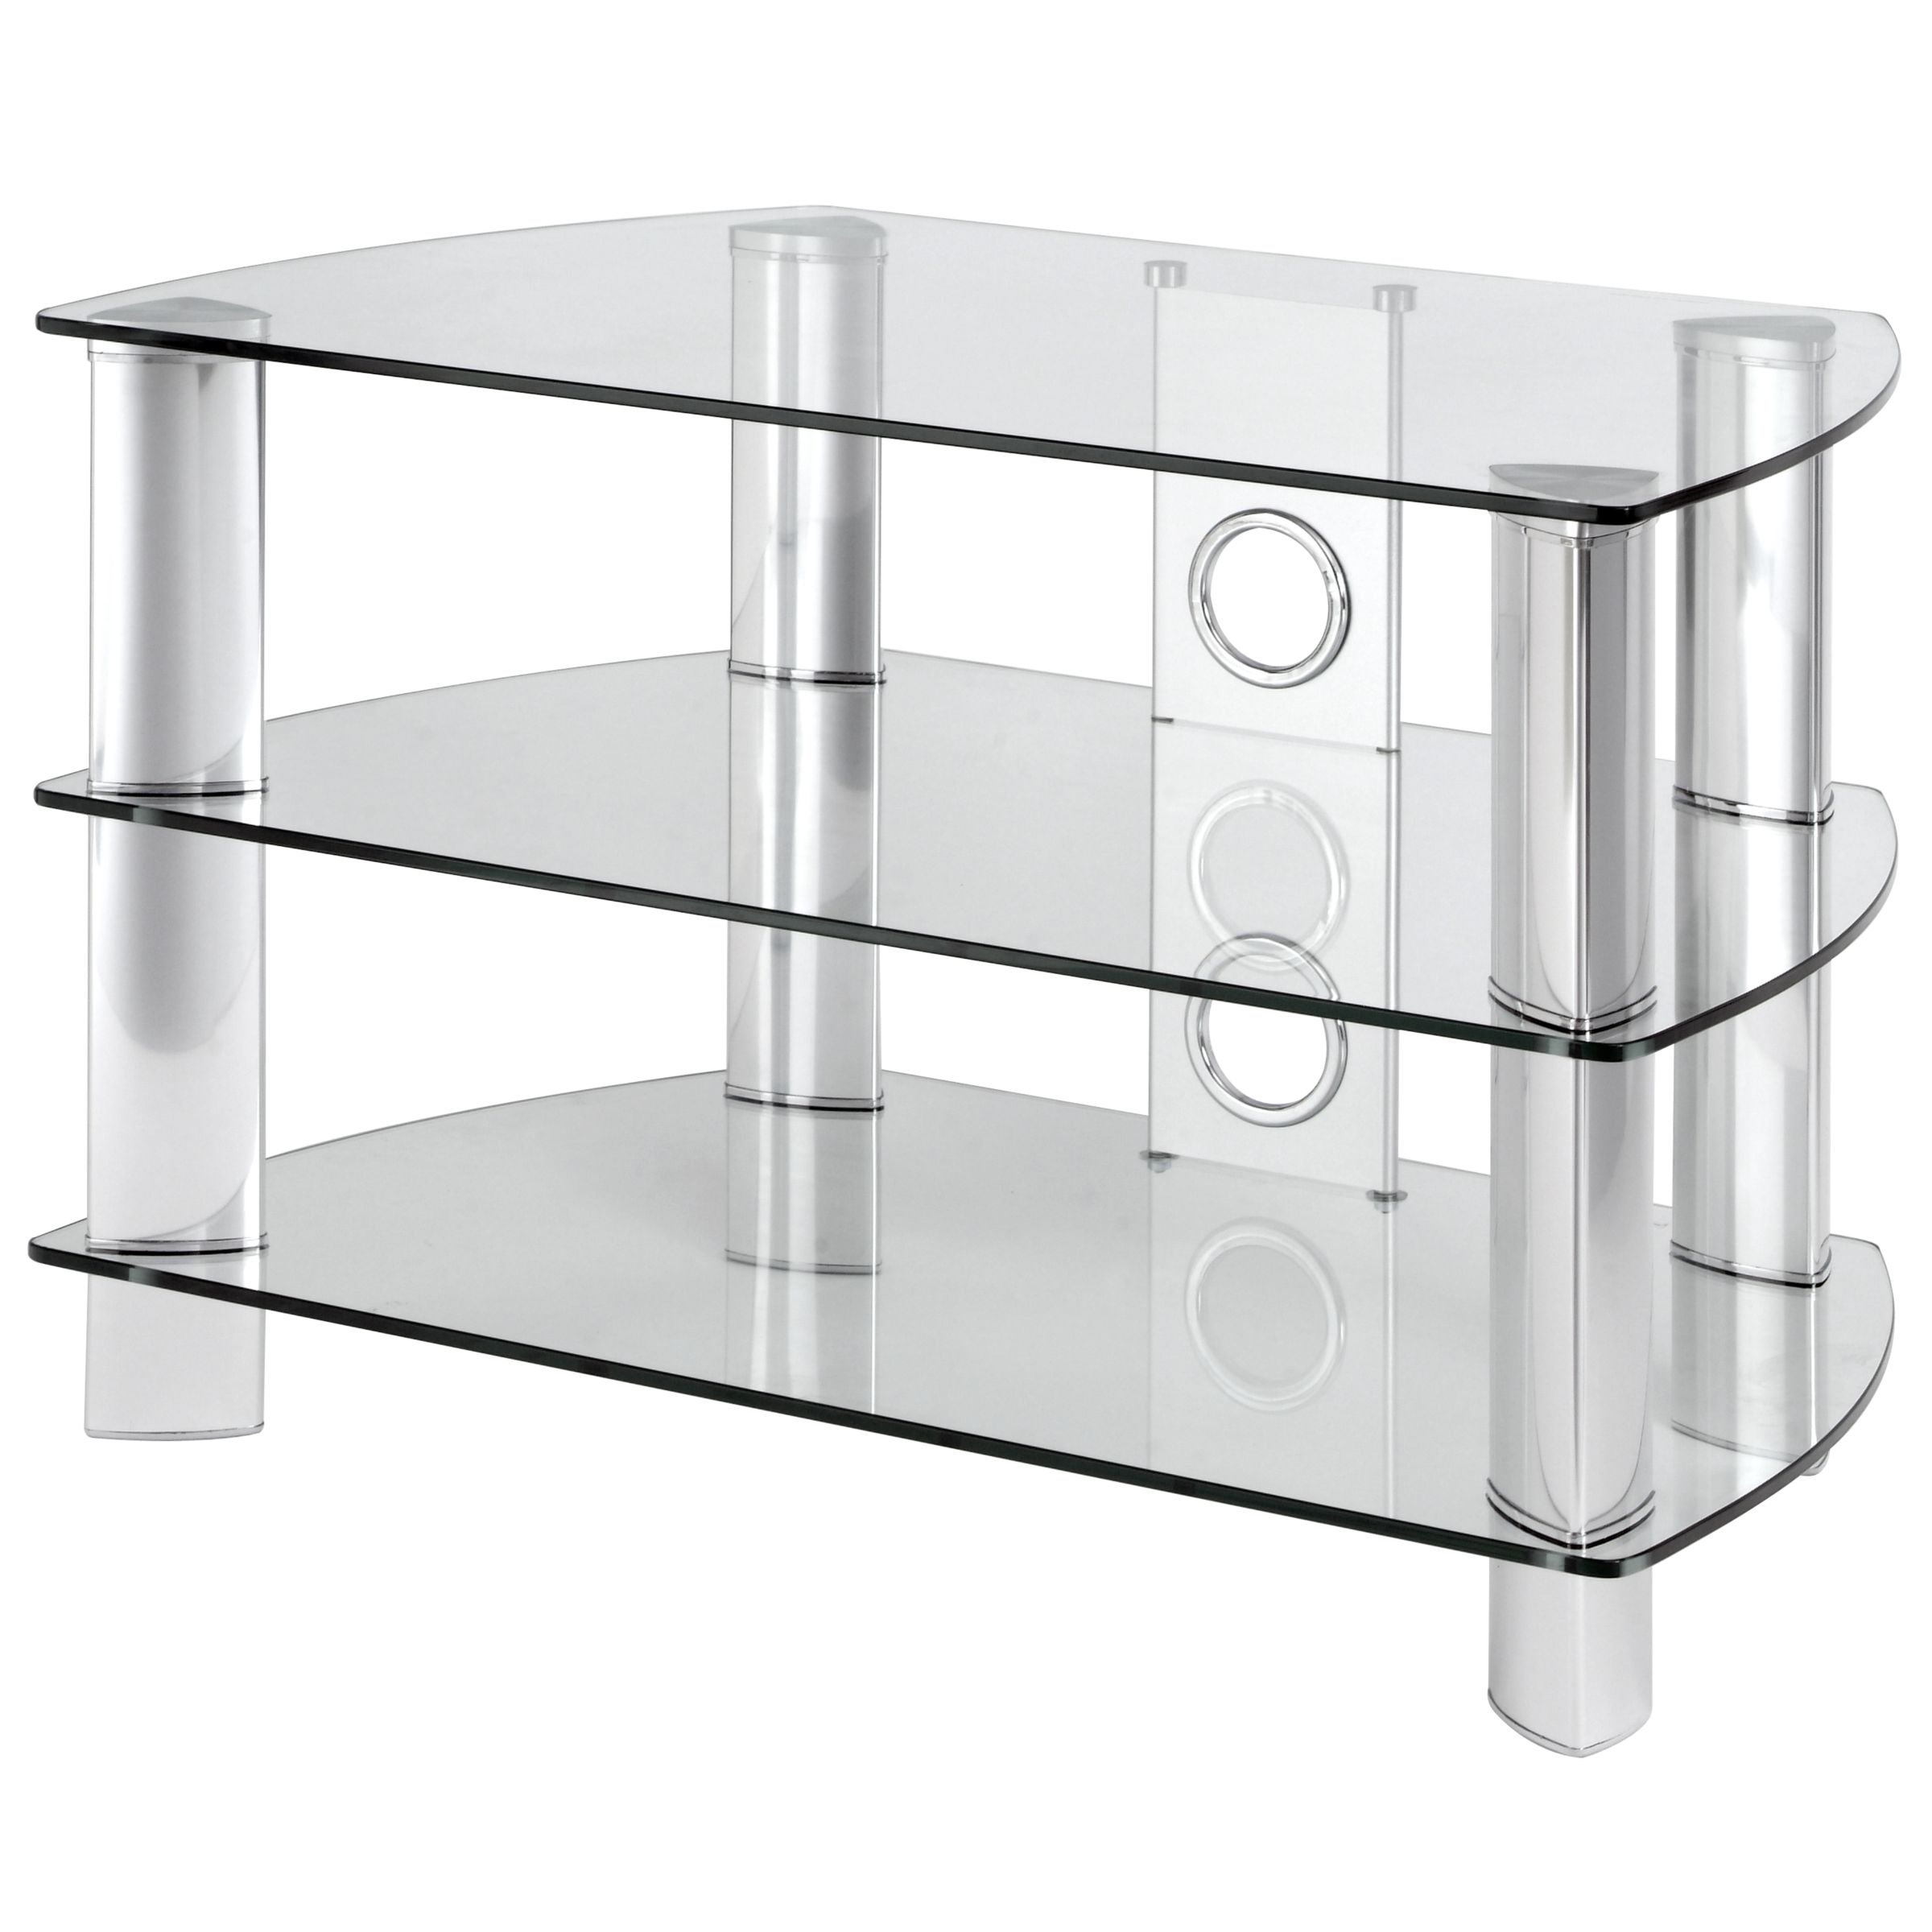 JL800/C10 Television Stand, Clear Glass